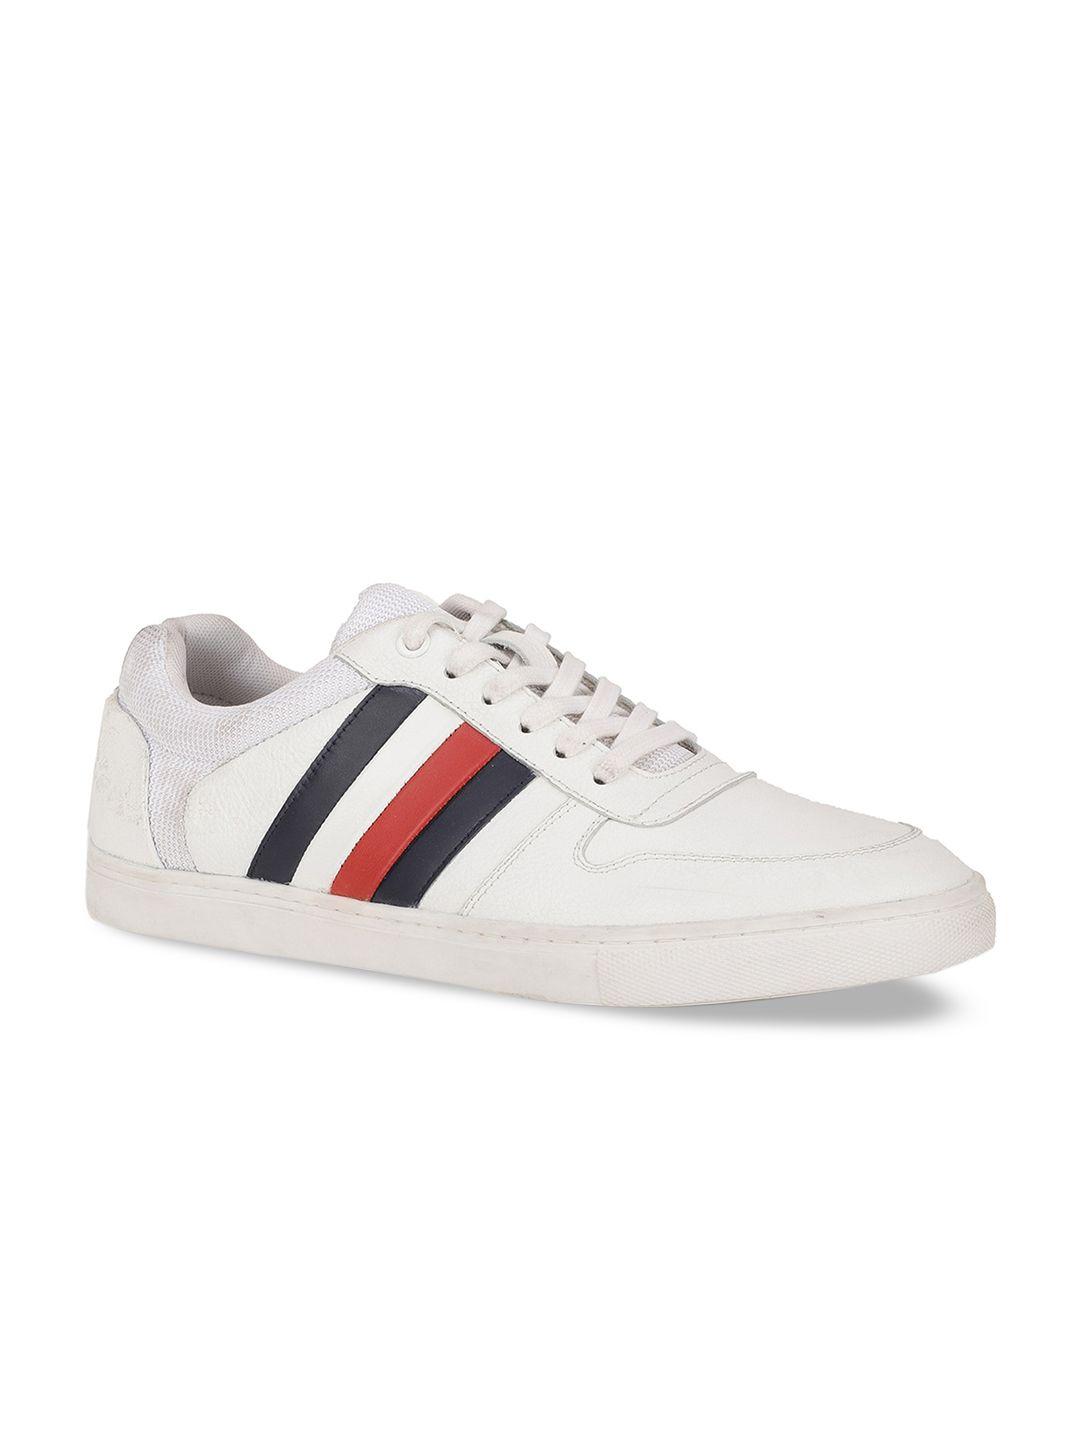 hush-puppies-men-white-striped-leather-sneakers